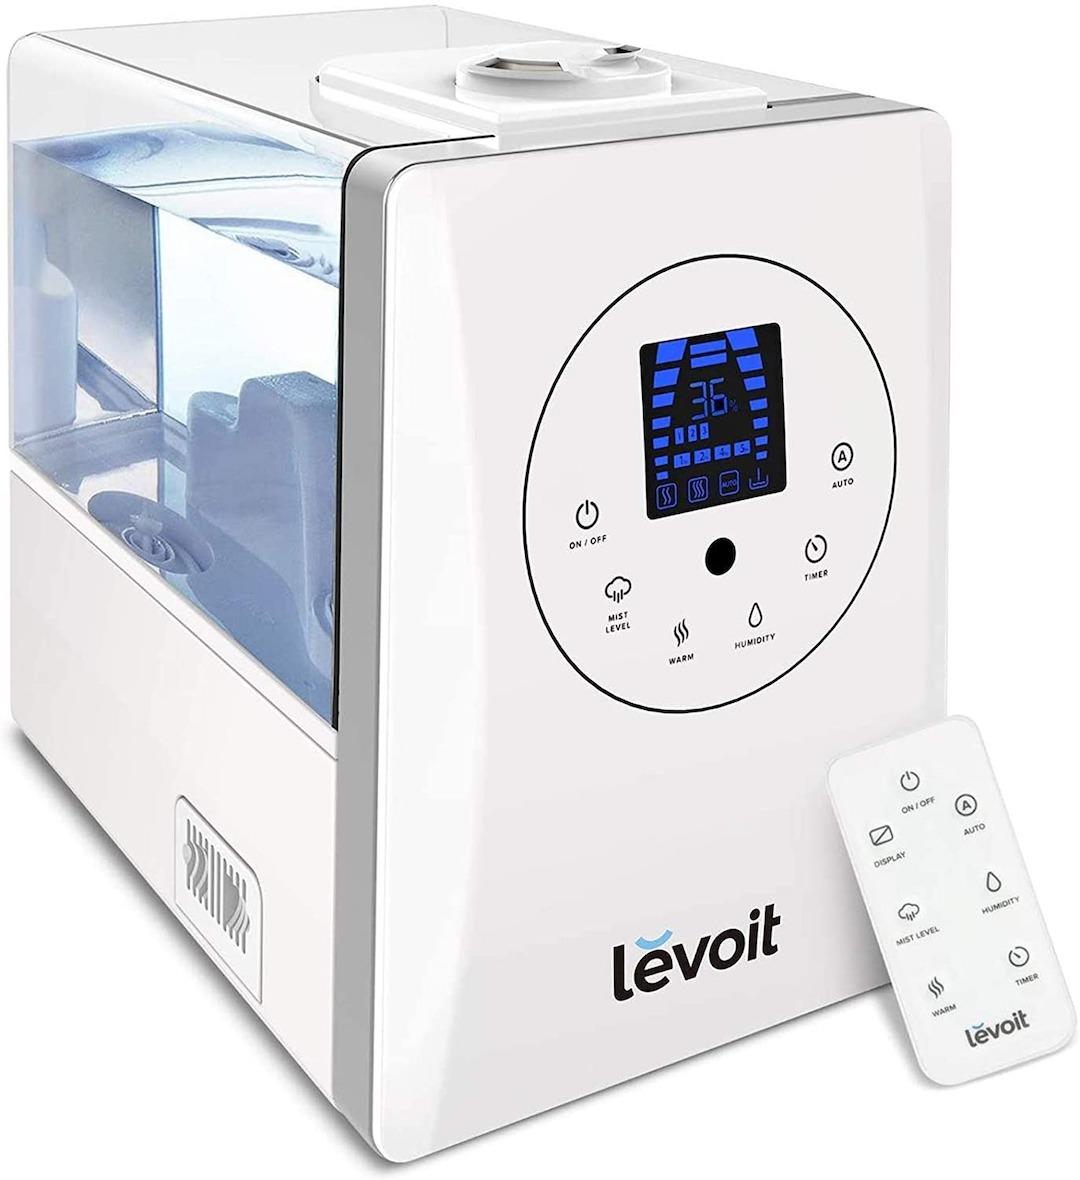 Levoit warm- and cool-mist humidifier